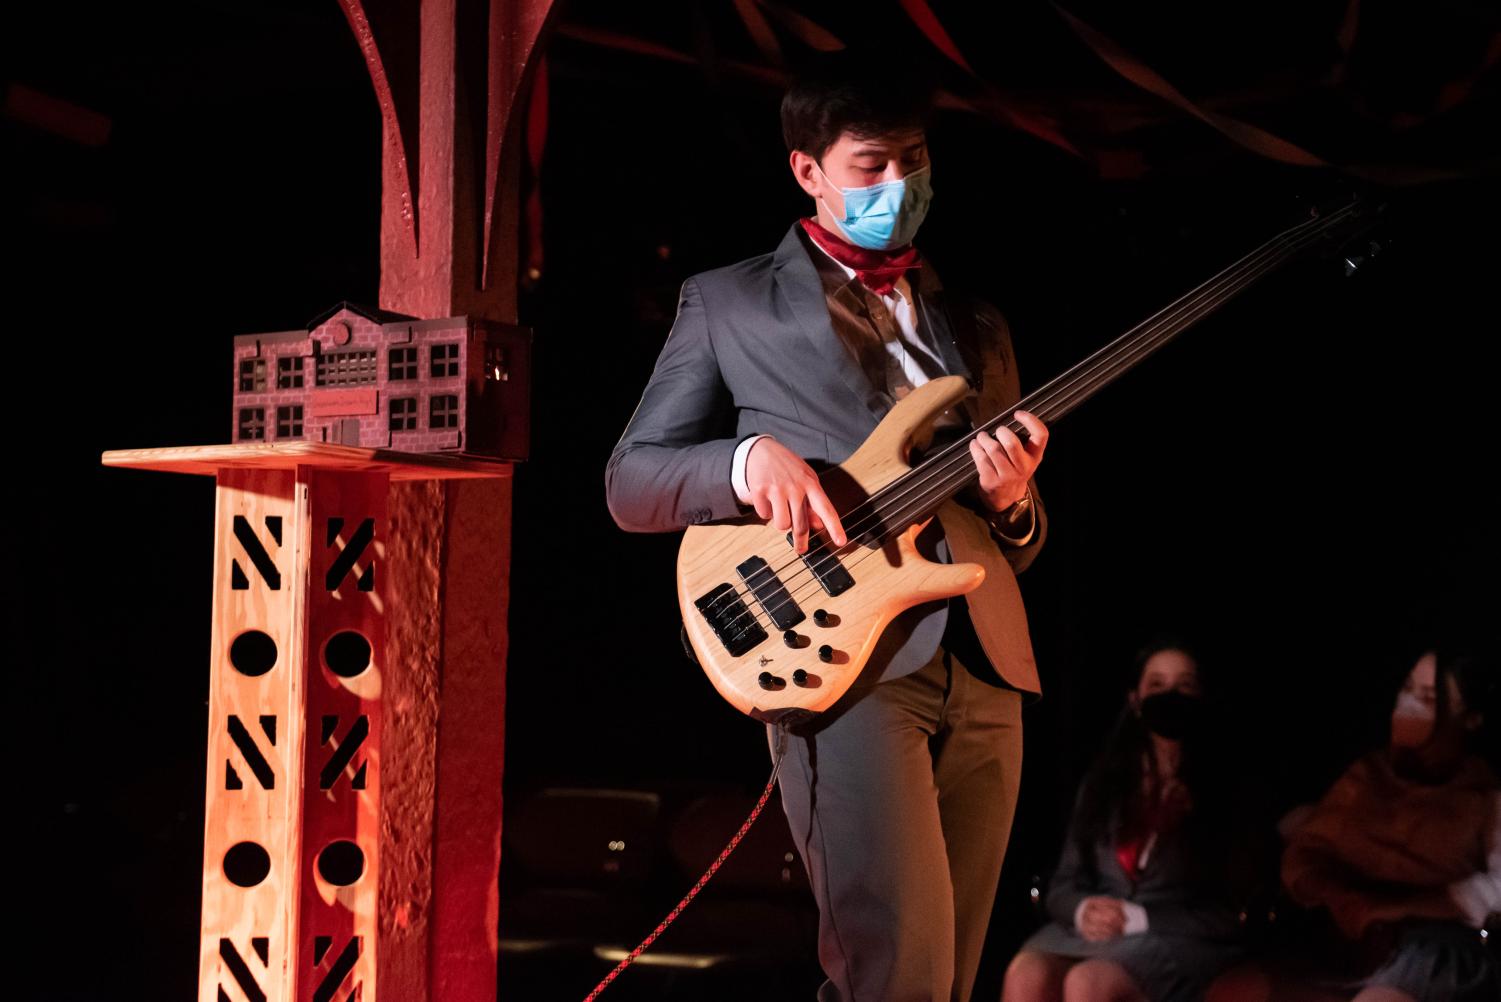 An+actor+in+a+suit+plays+an+electric+bass.